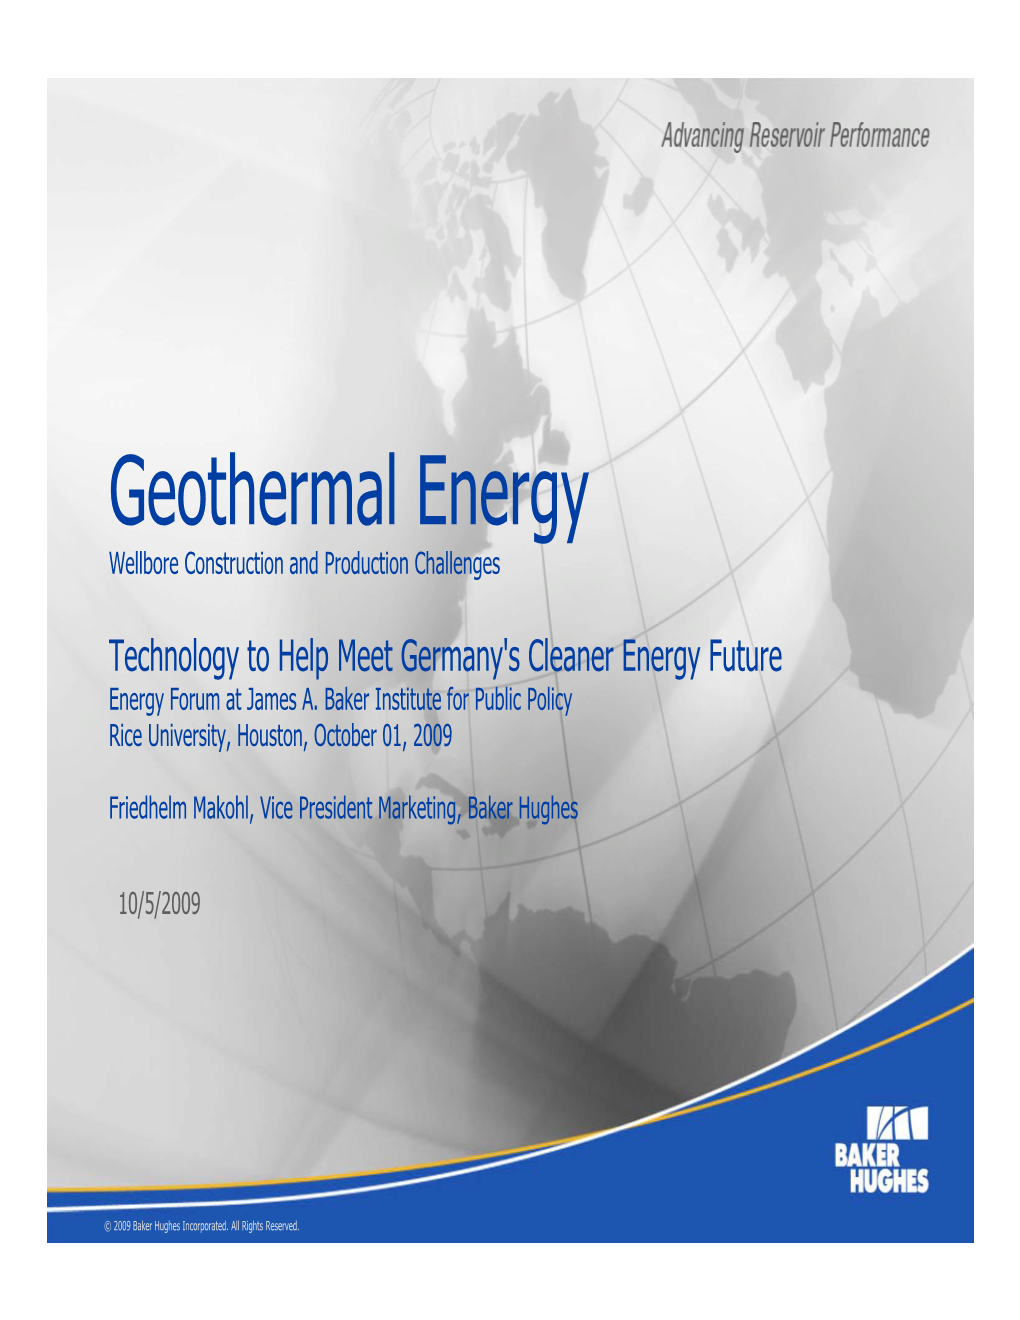 Geothermal Energy Wellbore Construction and Production Challenges